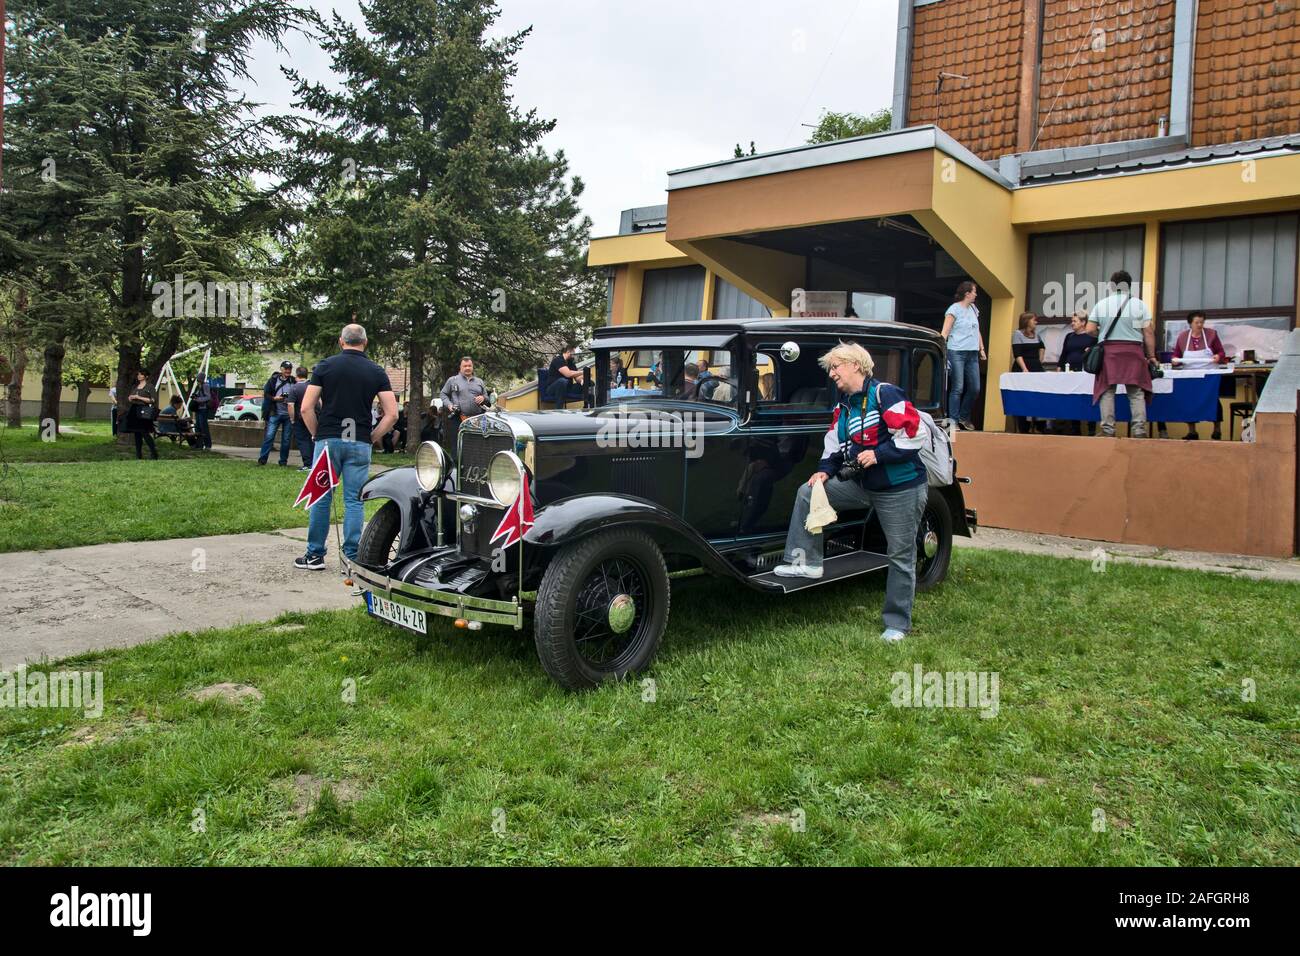 Ivanovo, Serbia, April 15, 2018. An old car model, an old timer exhibited at a traditional photo event. Stock Photo